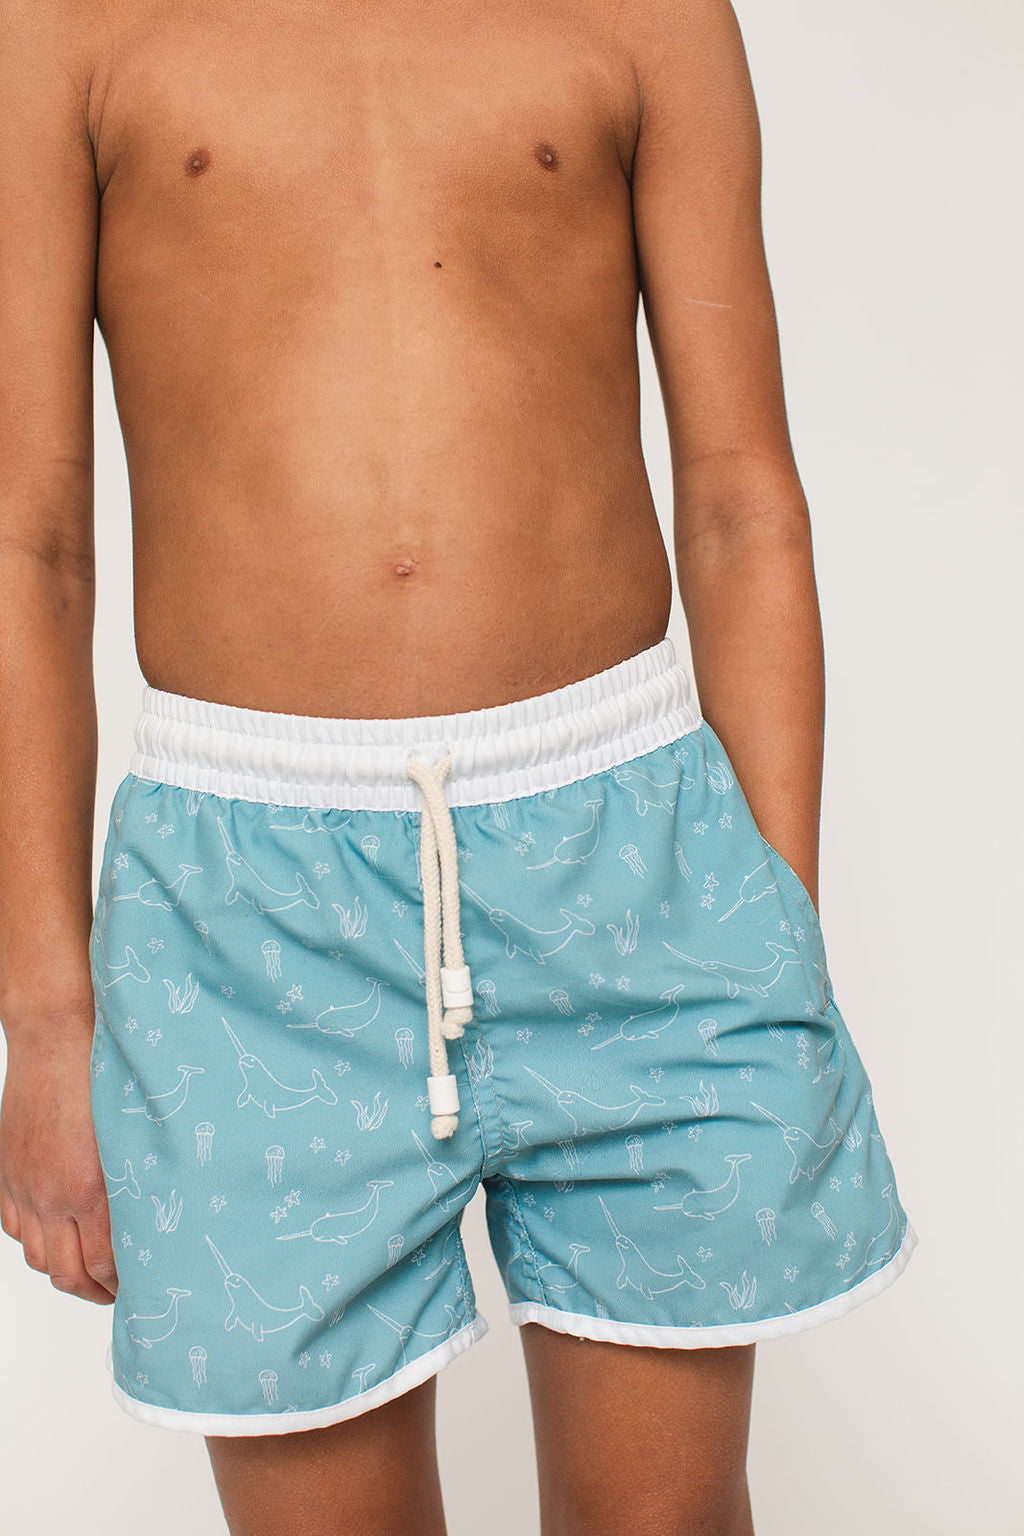 The SWIM Short - Narwhal